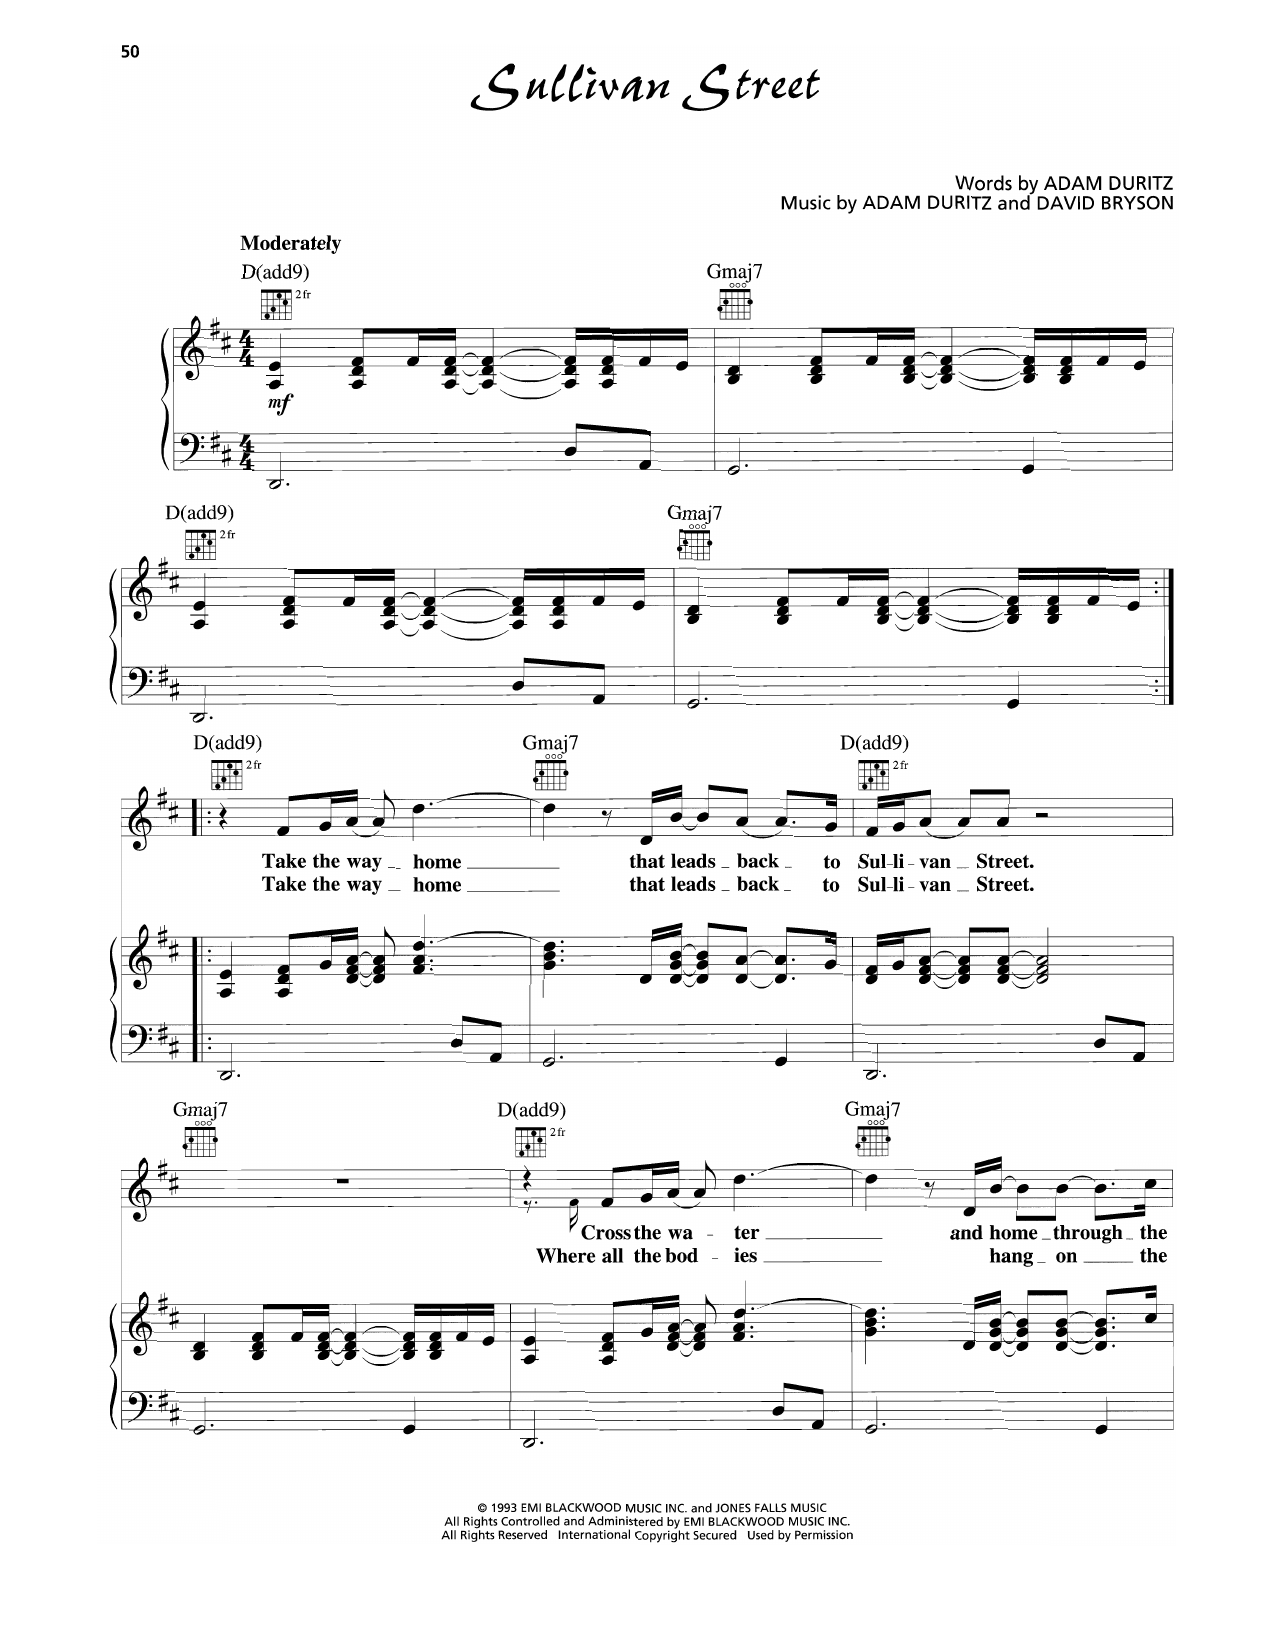 Download Counting Crows Sullivan Street Sheet Music